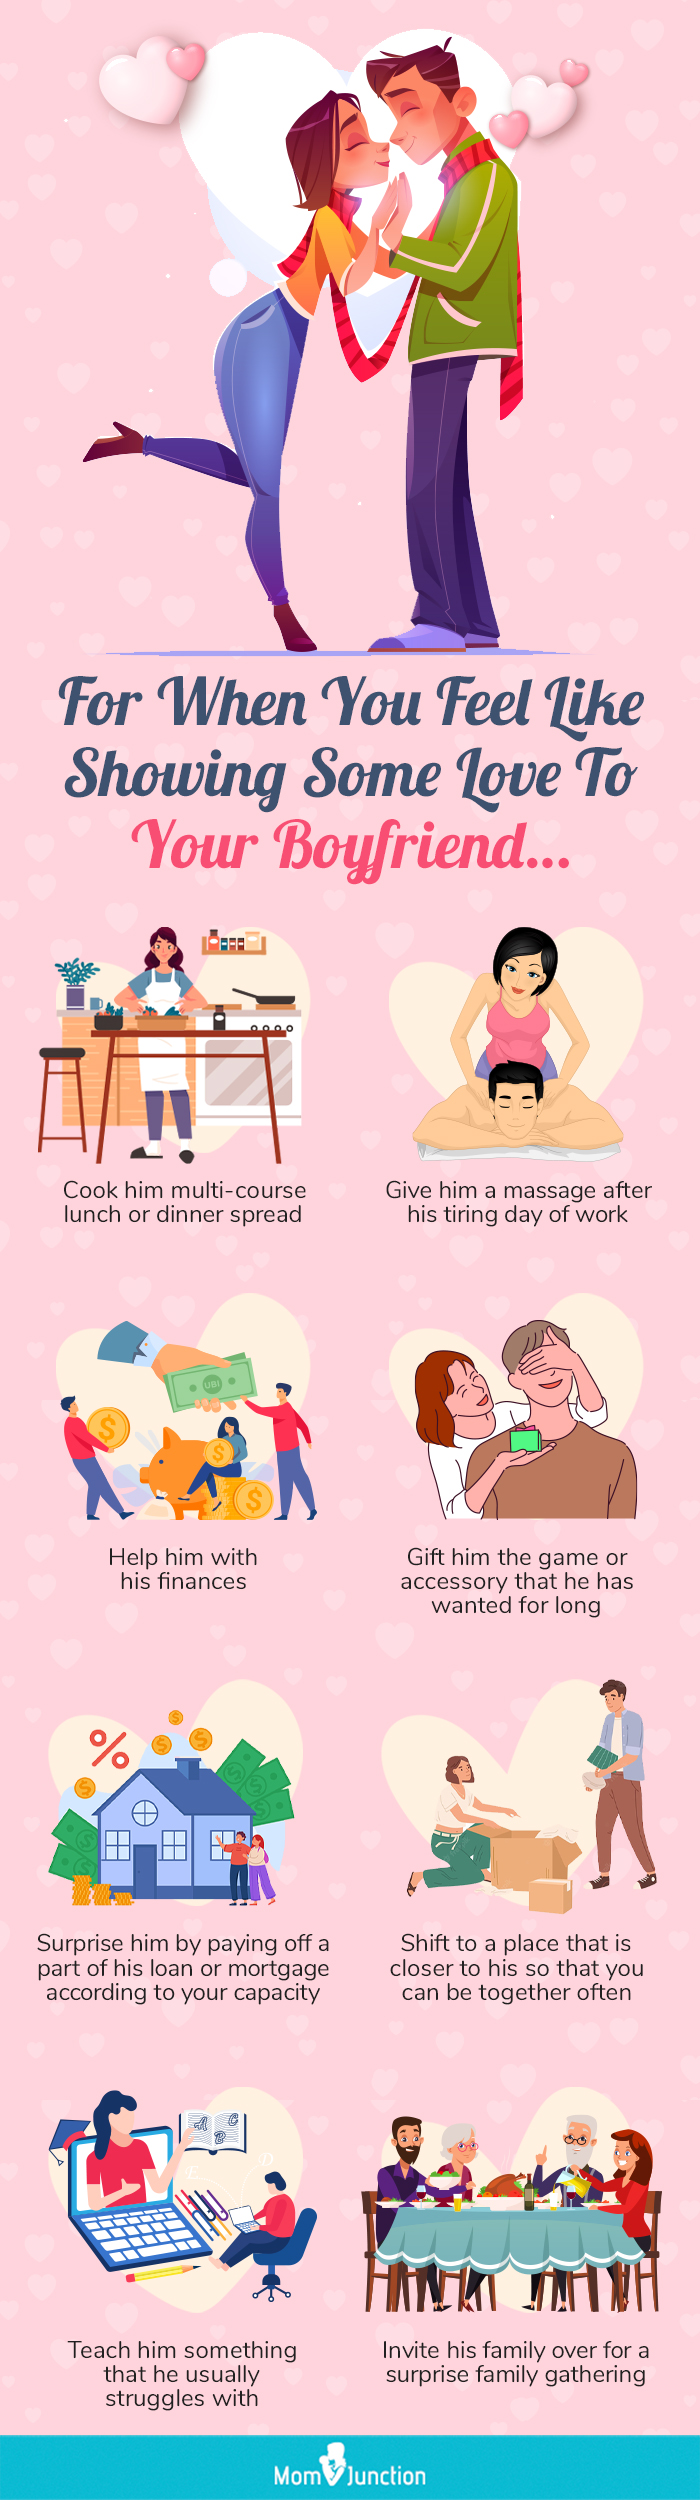 for when you feel like showing some love to your boyfriend (infographic)